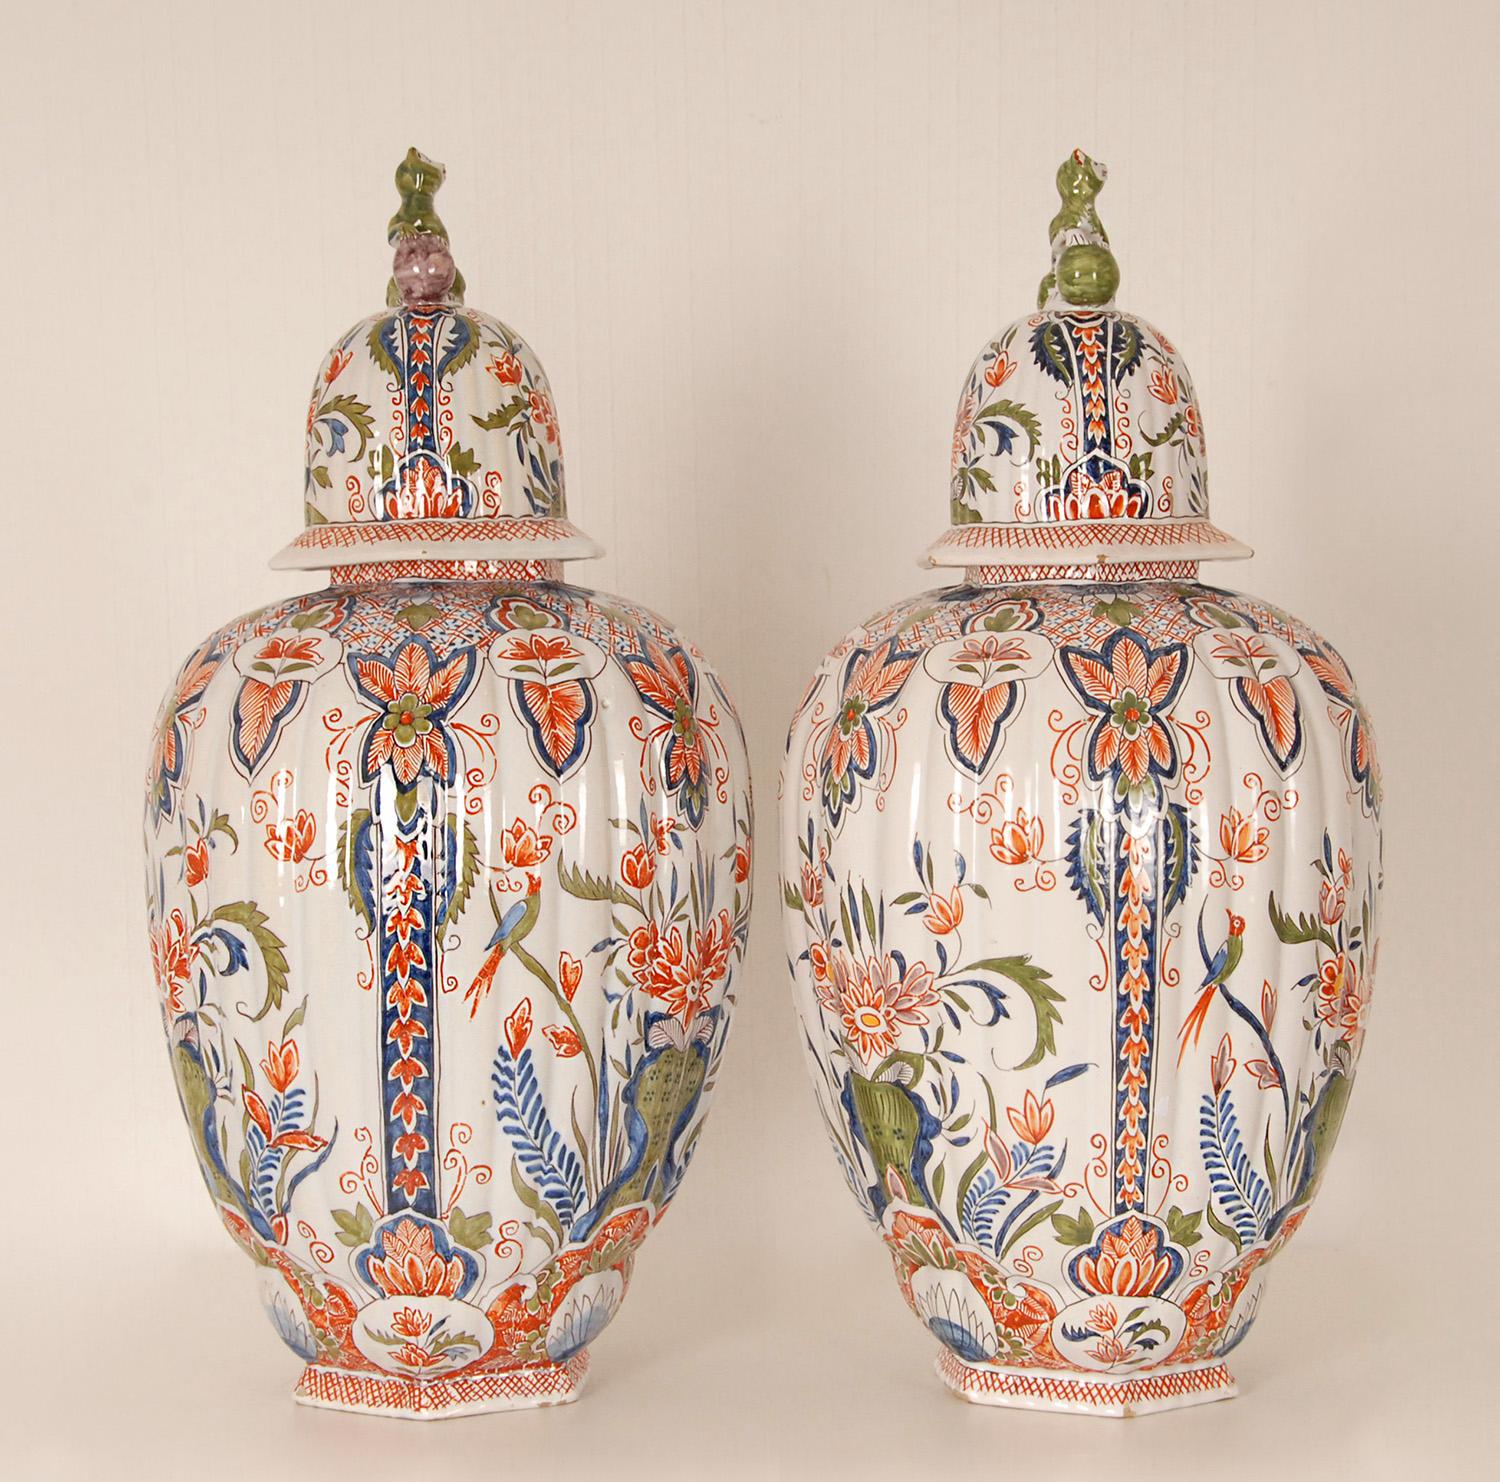 Antique Delft Vases Polychrome Covered Baluster Vases With Foo Cats - a pair For Sale 3